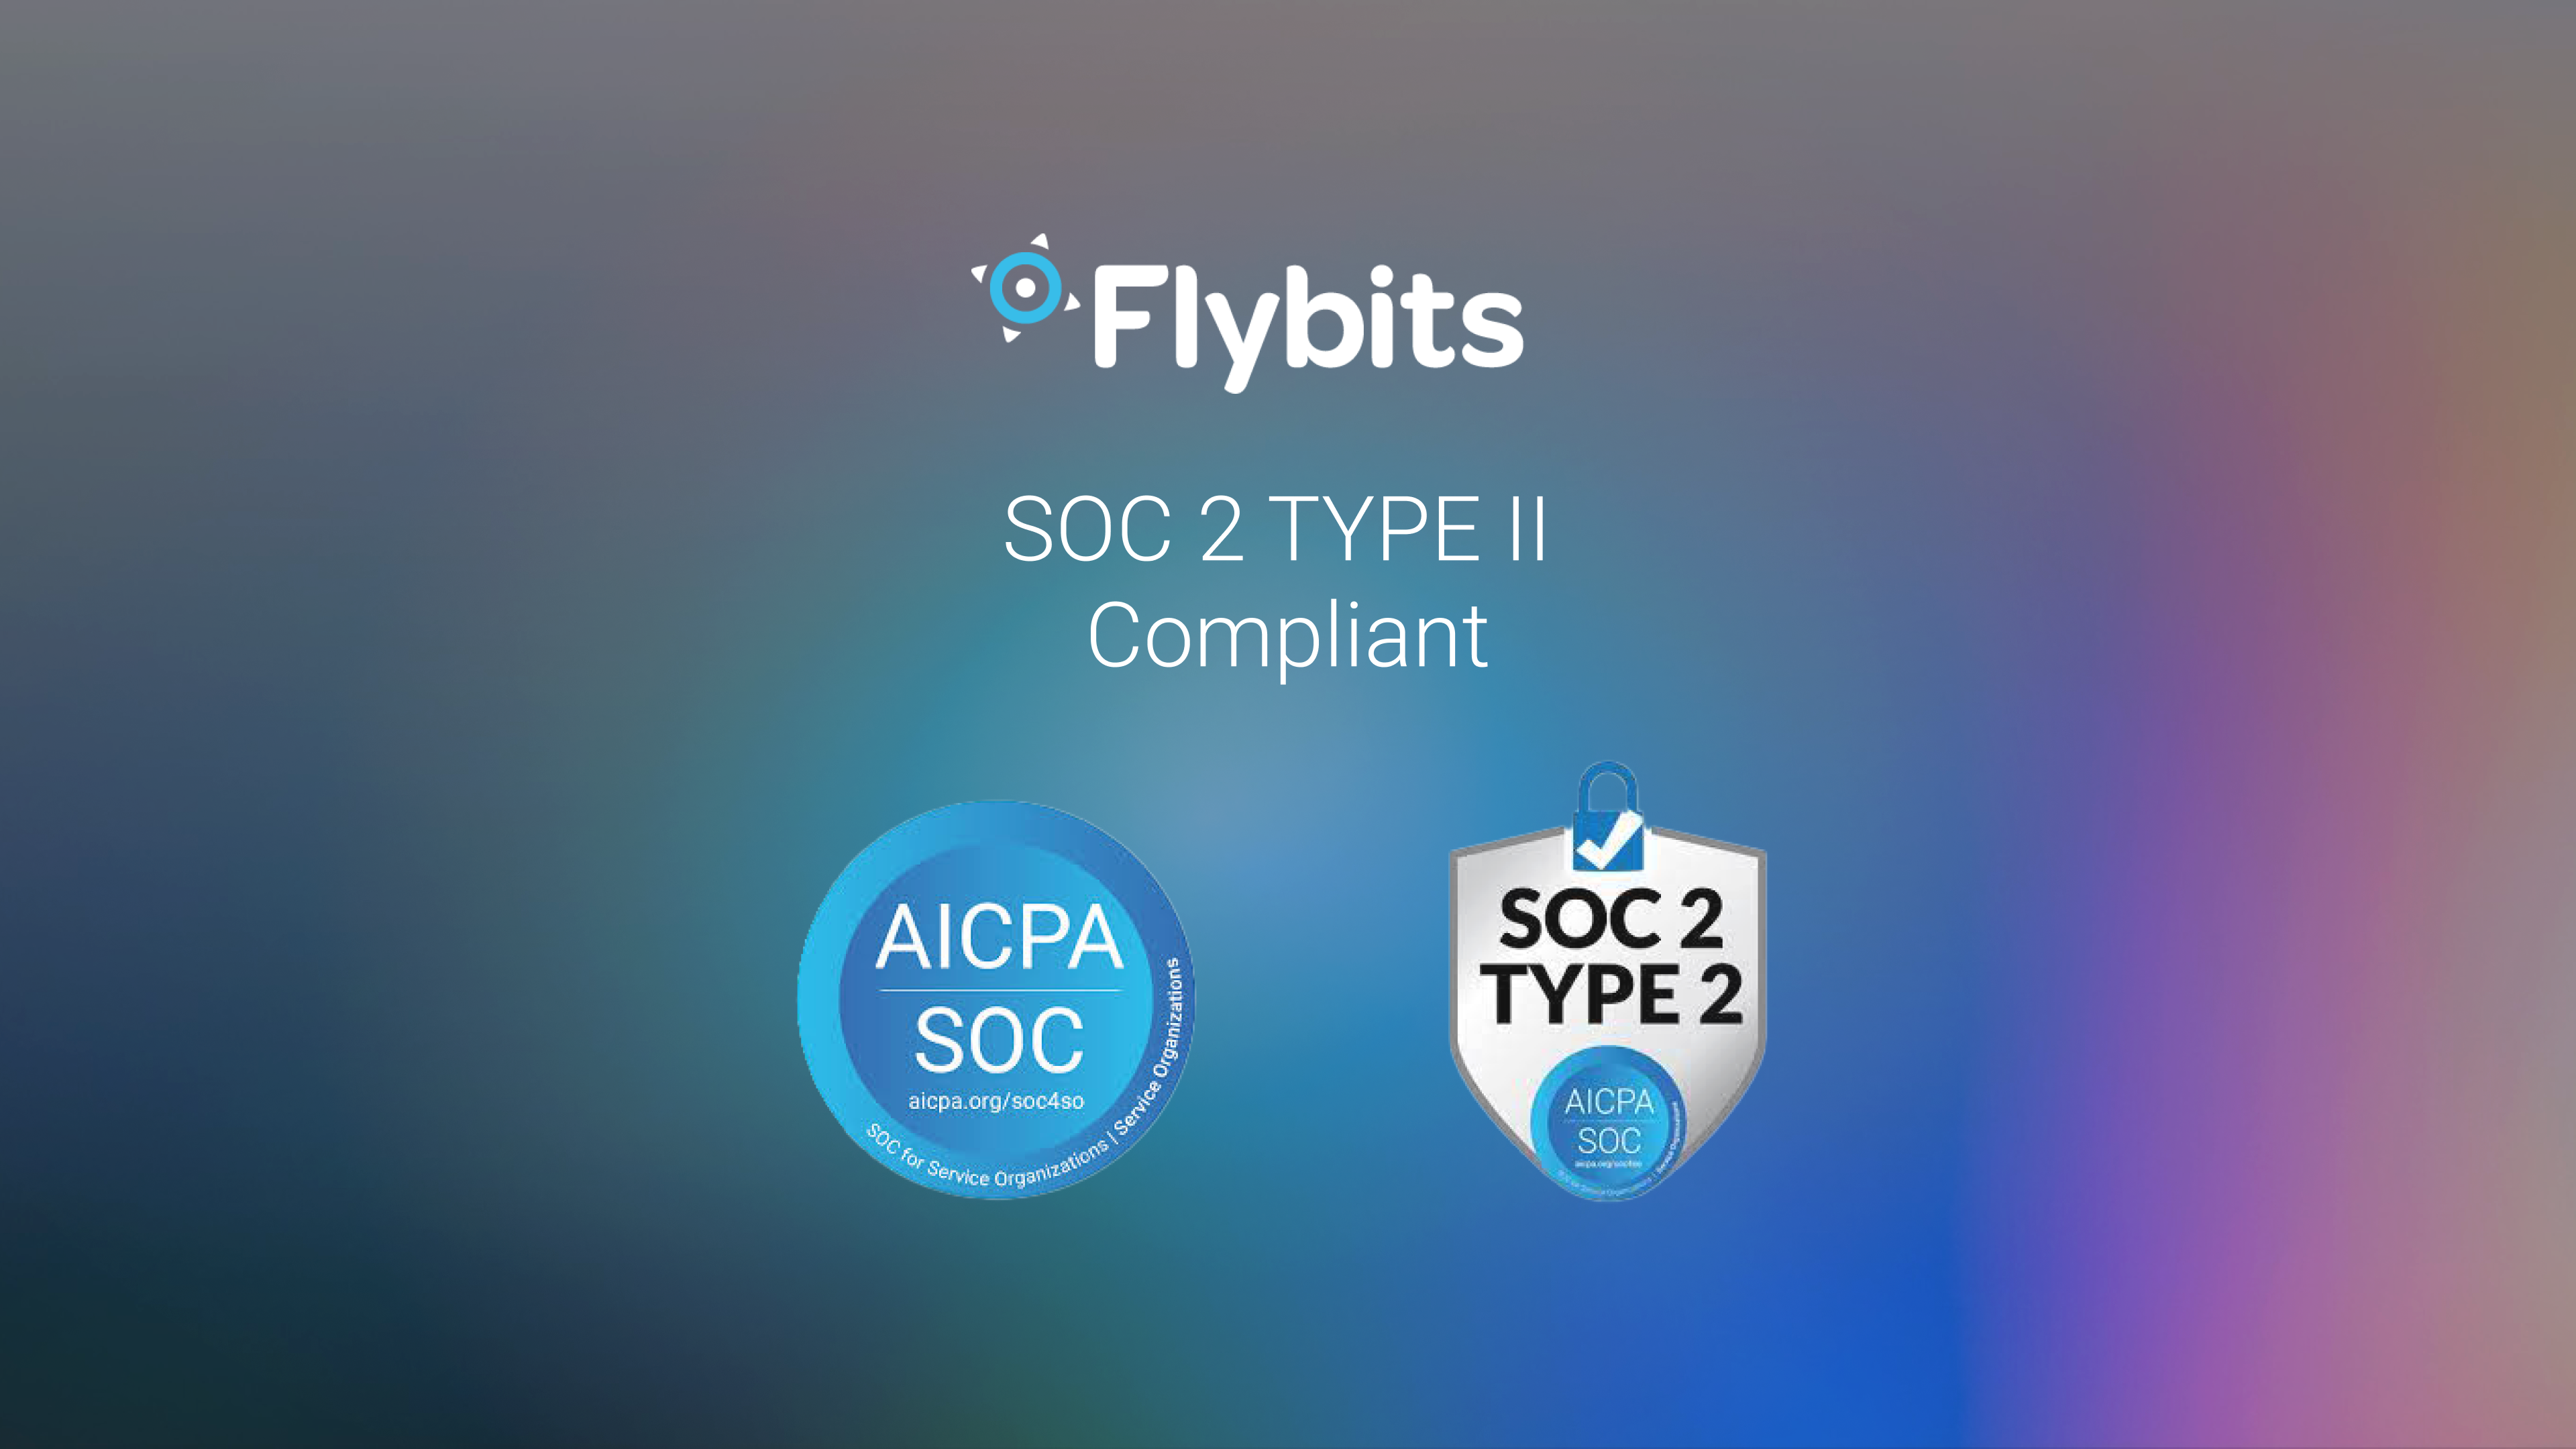 SOC 2 Type 2 compliant logos to signify Flybits is accredited